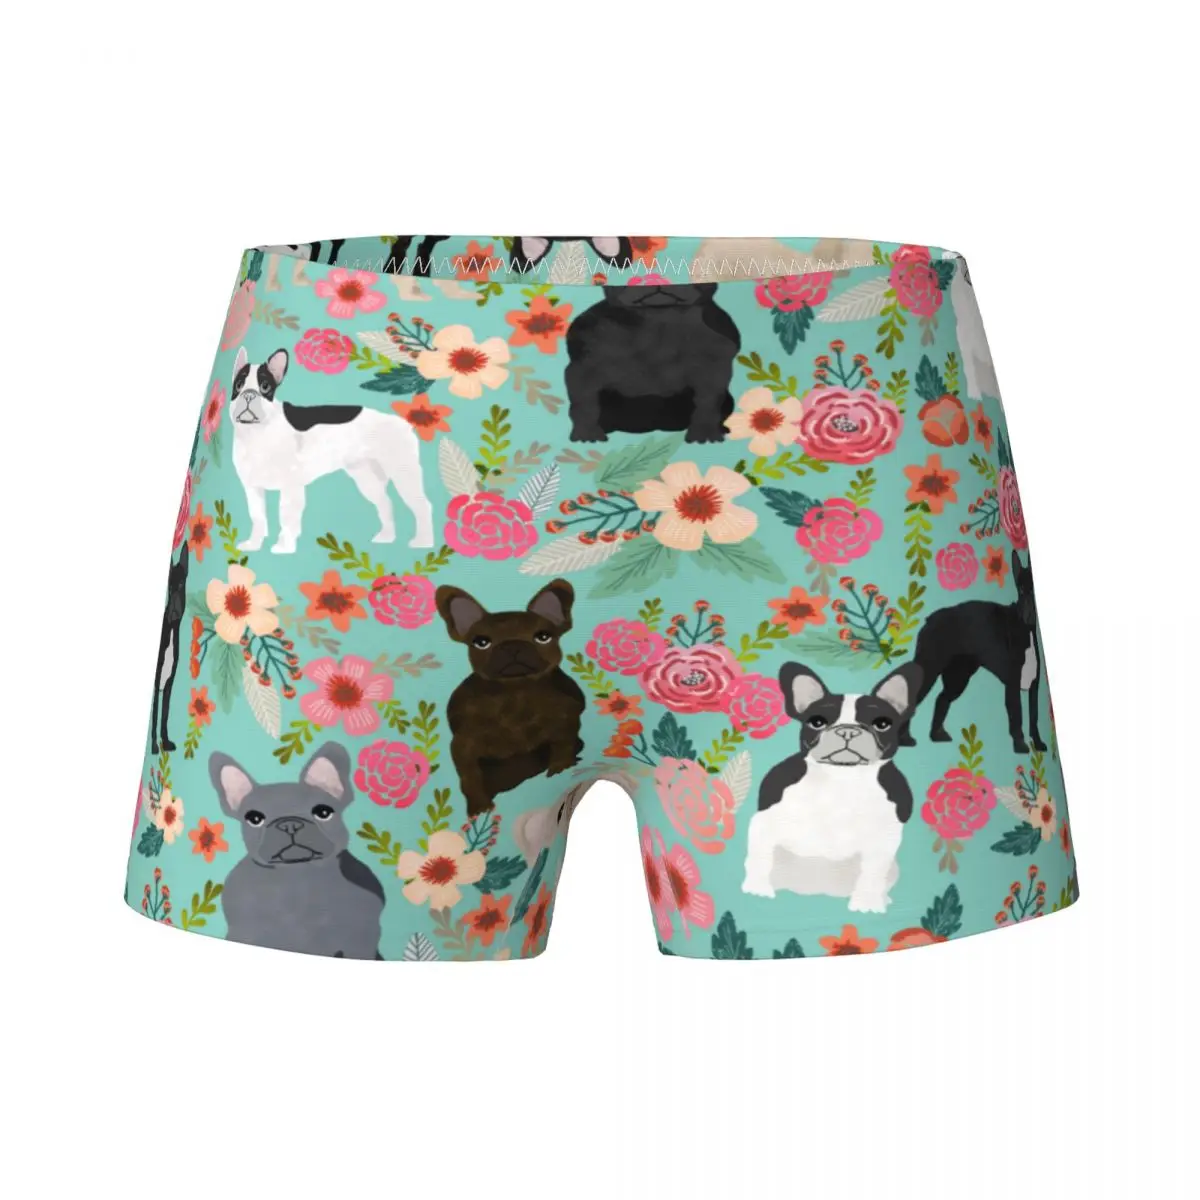 

Youth Girls' French Bulldogs Vintage Florals Dog Boxers Children Cotton Underwear Teenagers Underpants Soft Briefs For 4-15Y